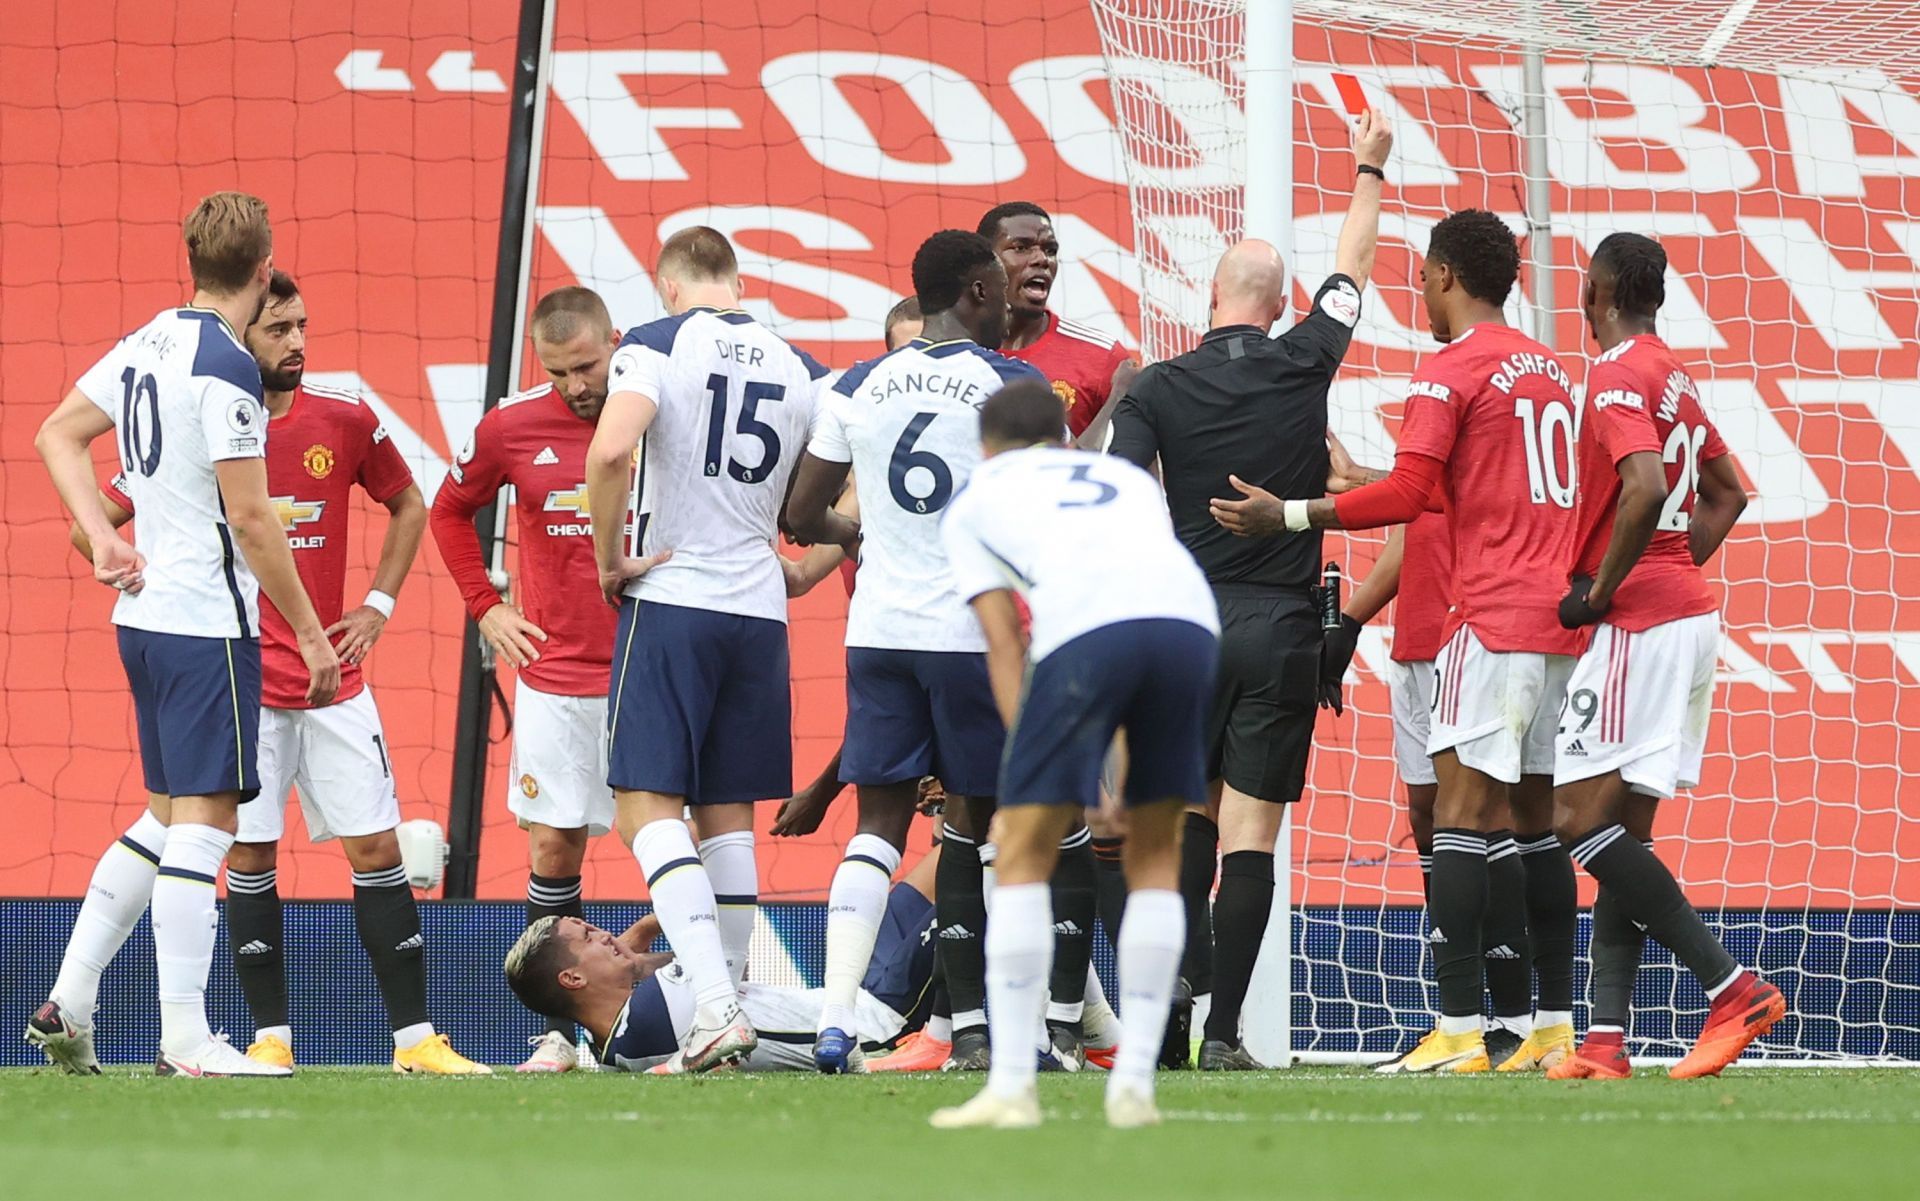 Referee Anthony Taylor shows a red card to Anthony Martial during the match between Manchester United and Tottenham Hotspur